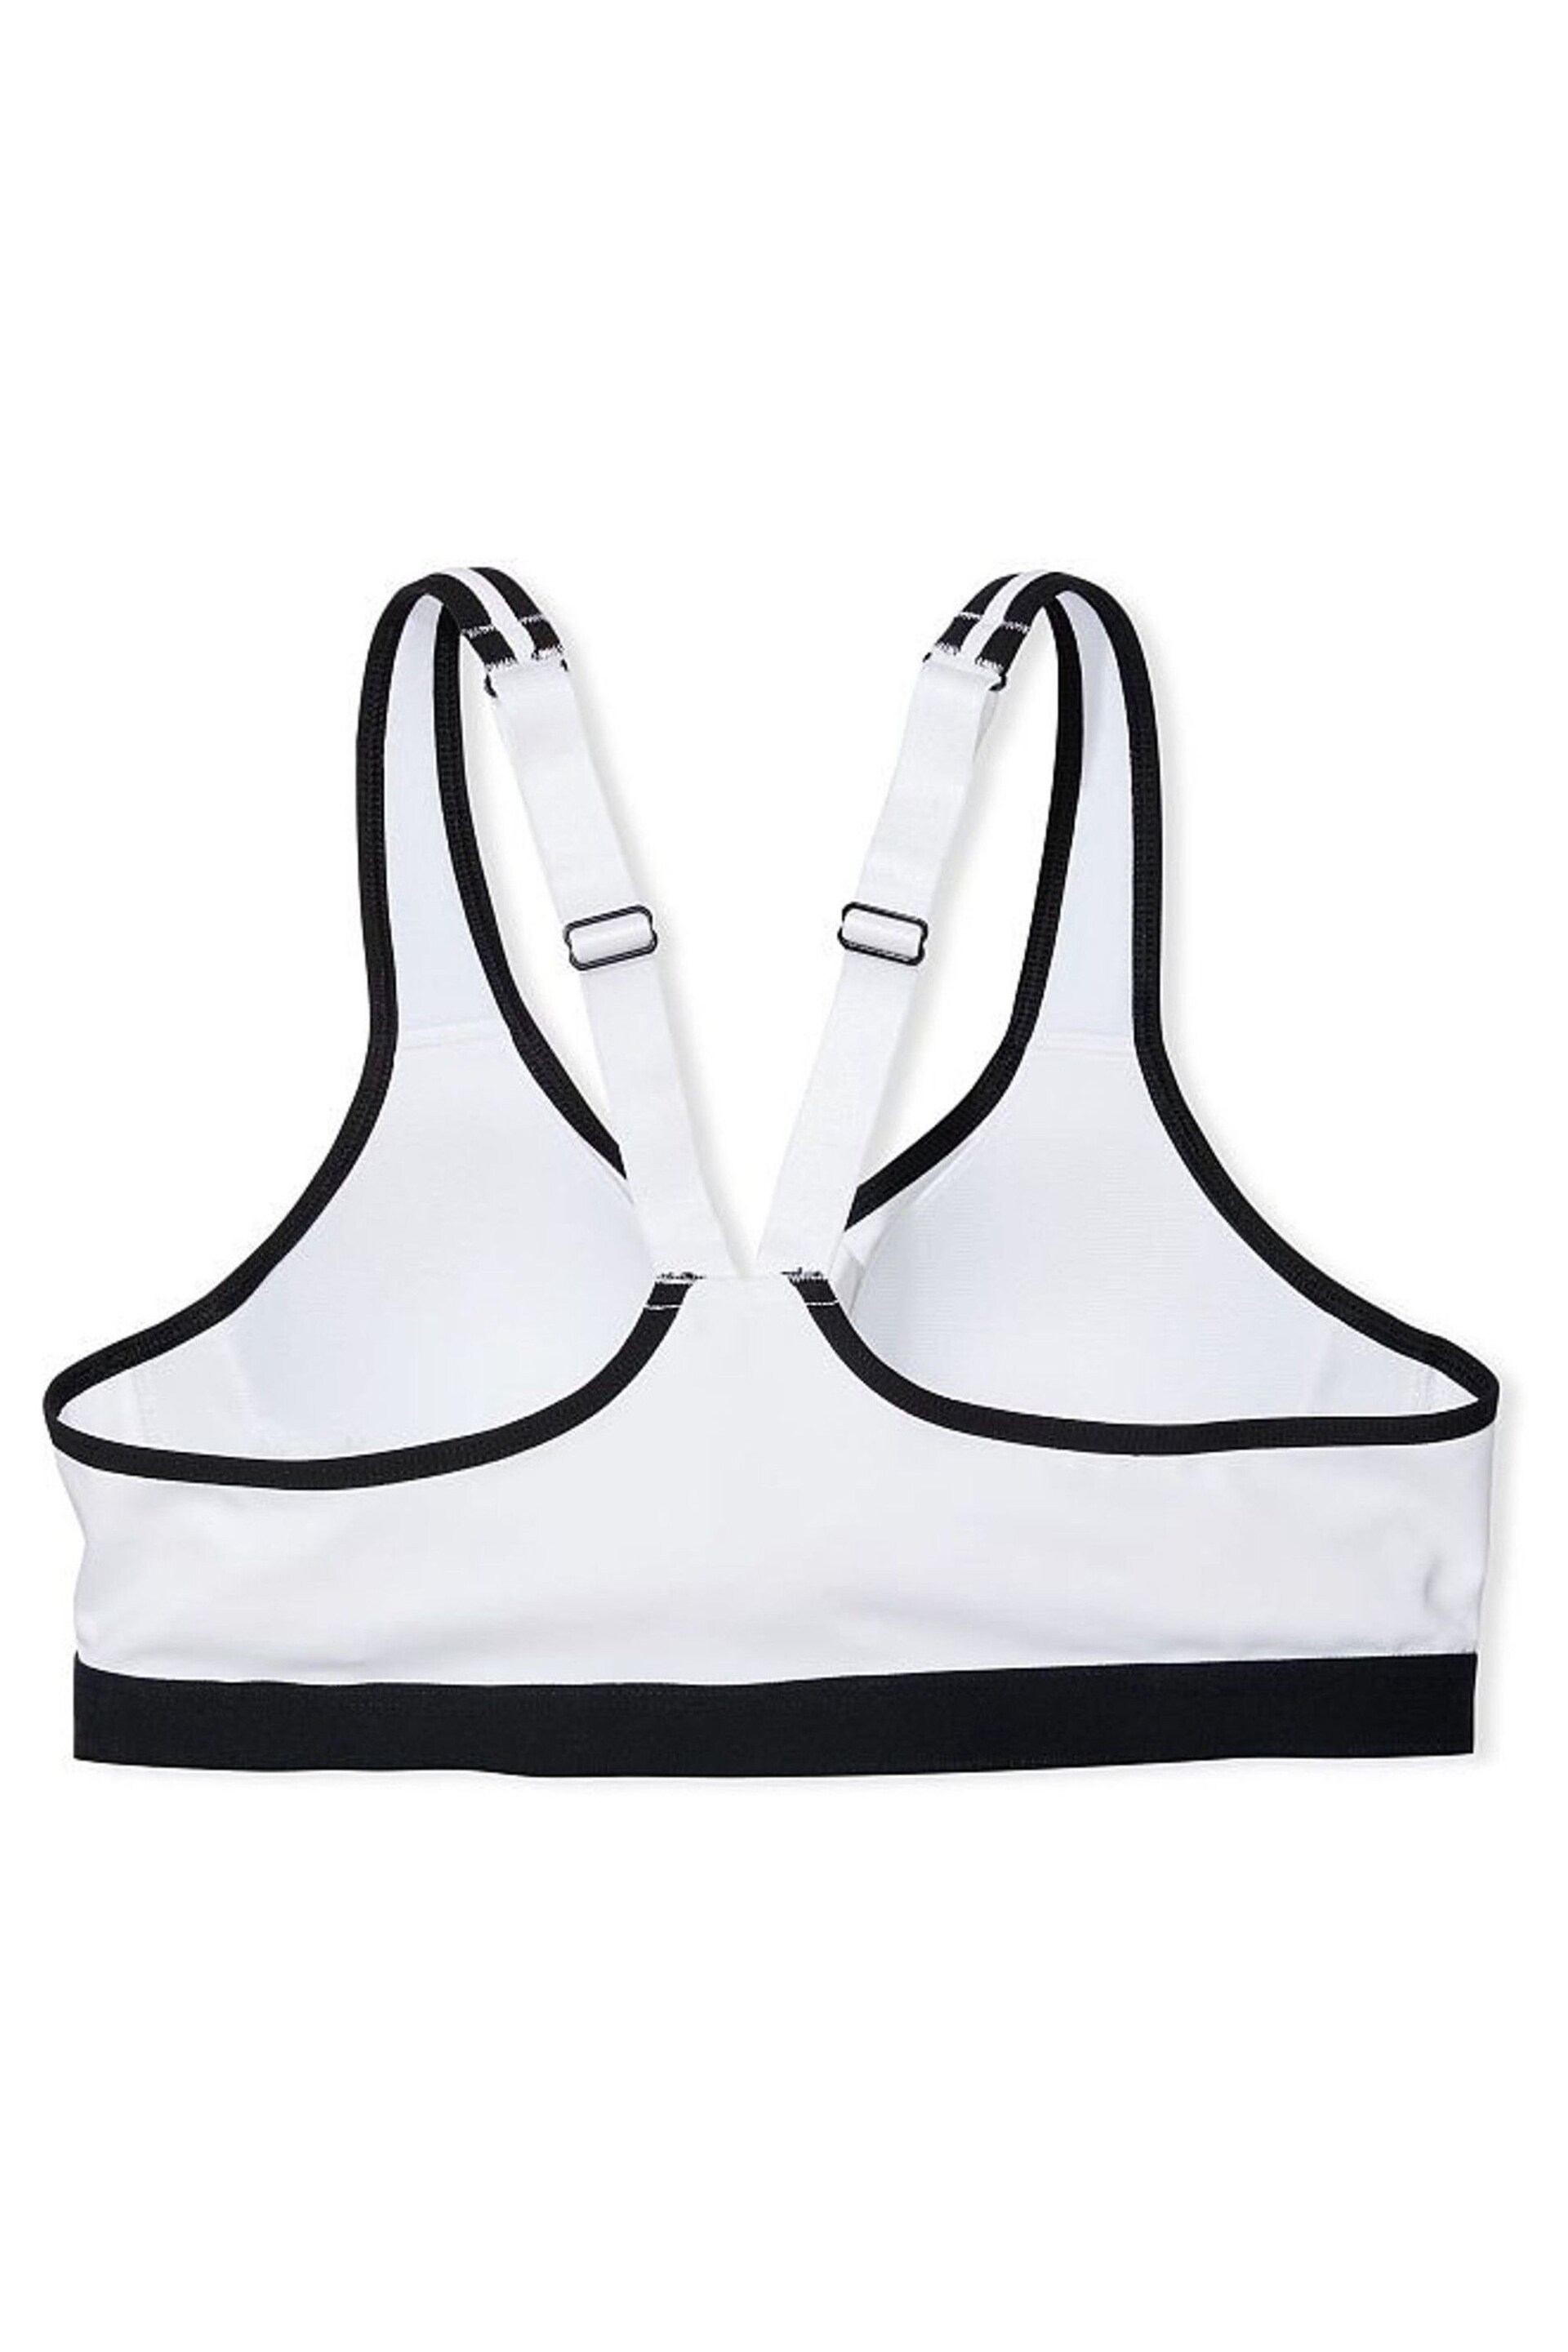 Victoria's Secret White Smooth Front Fastening Wired High Impact Sports Bra - Image 4 of 5